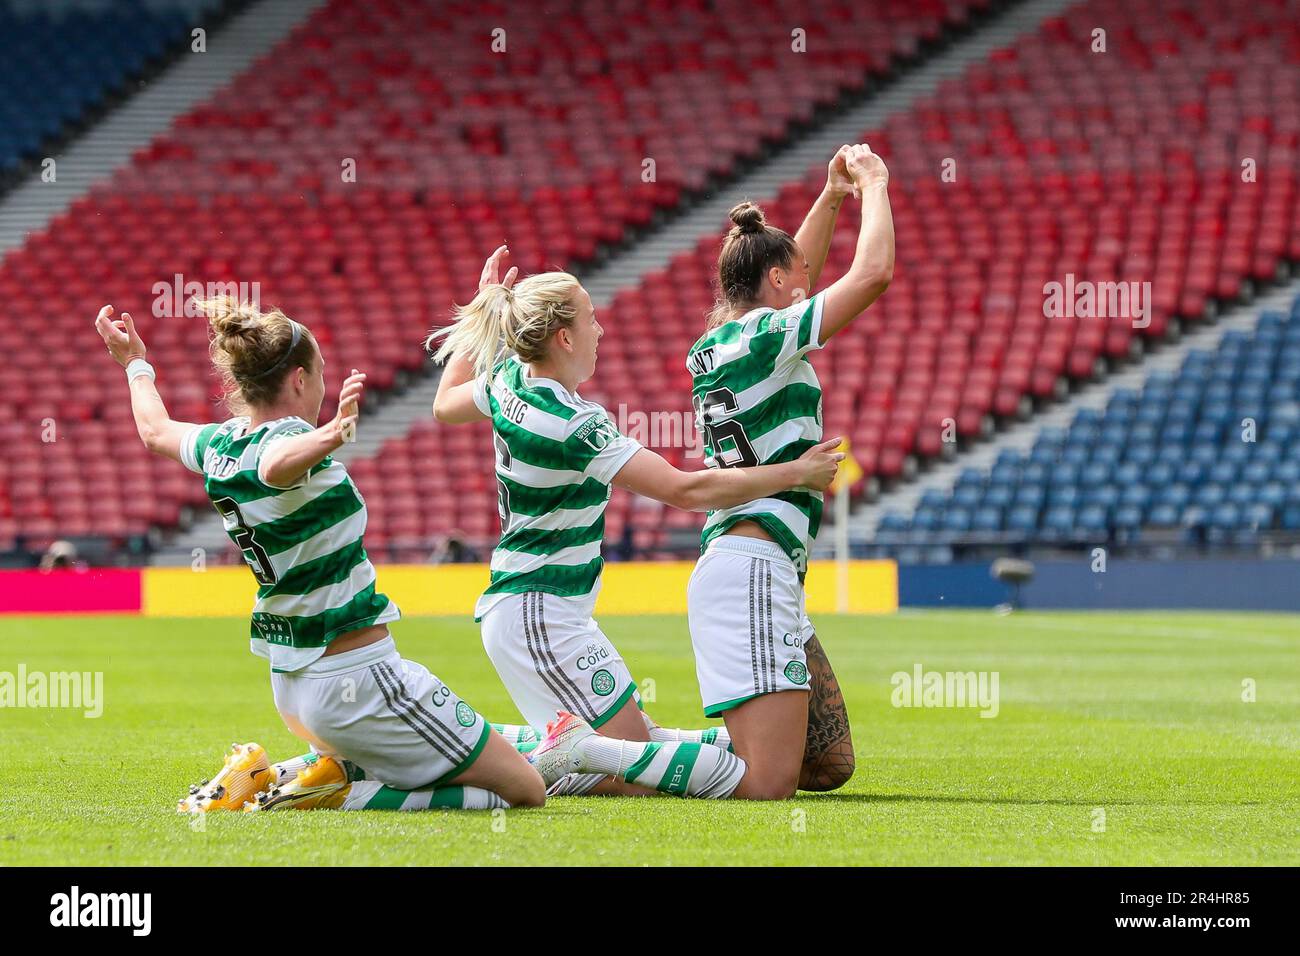 Glasgow, UK. 28th May, 2023. In the final of the Womens Scottish Cup in a game between Celtic and Rangers, Celtic won 2 - 0. The scorers were Natasha Flint, number 26, in 64 minutes and Claire O'Riodan, number 3, in 68 minutes. Credit: Findlay/Alamy Live News Stock Photo